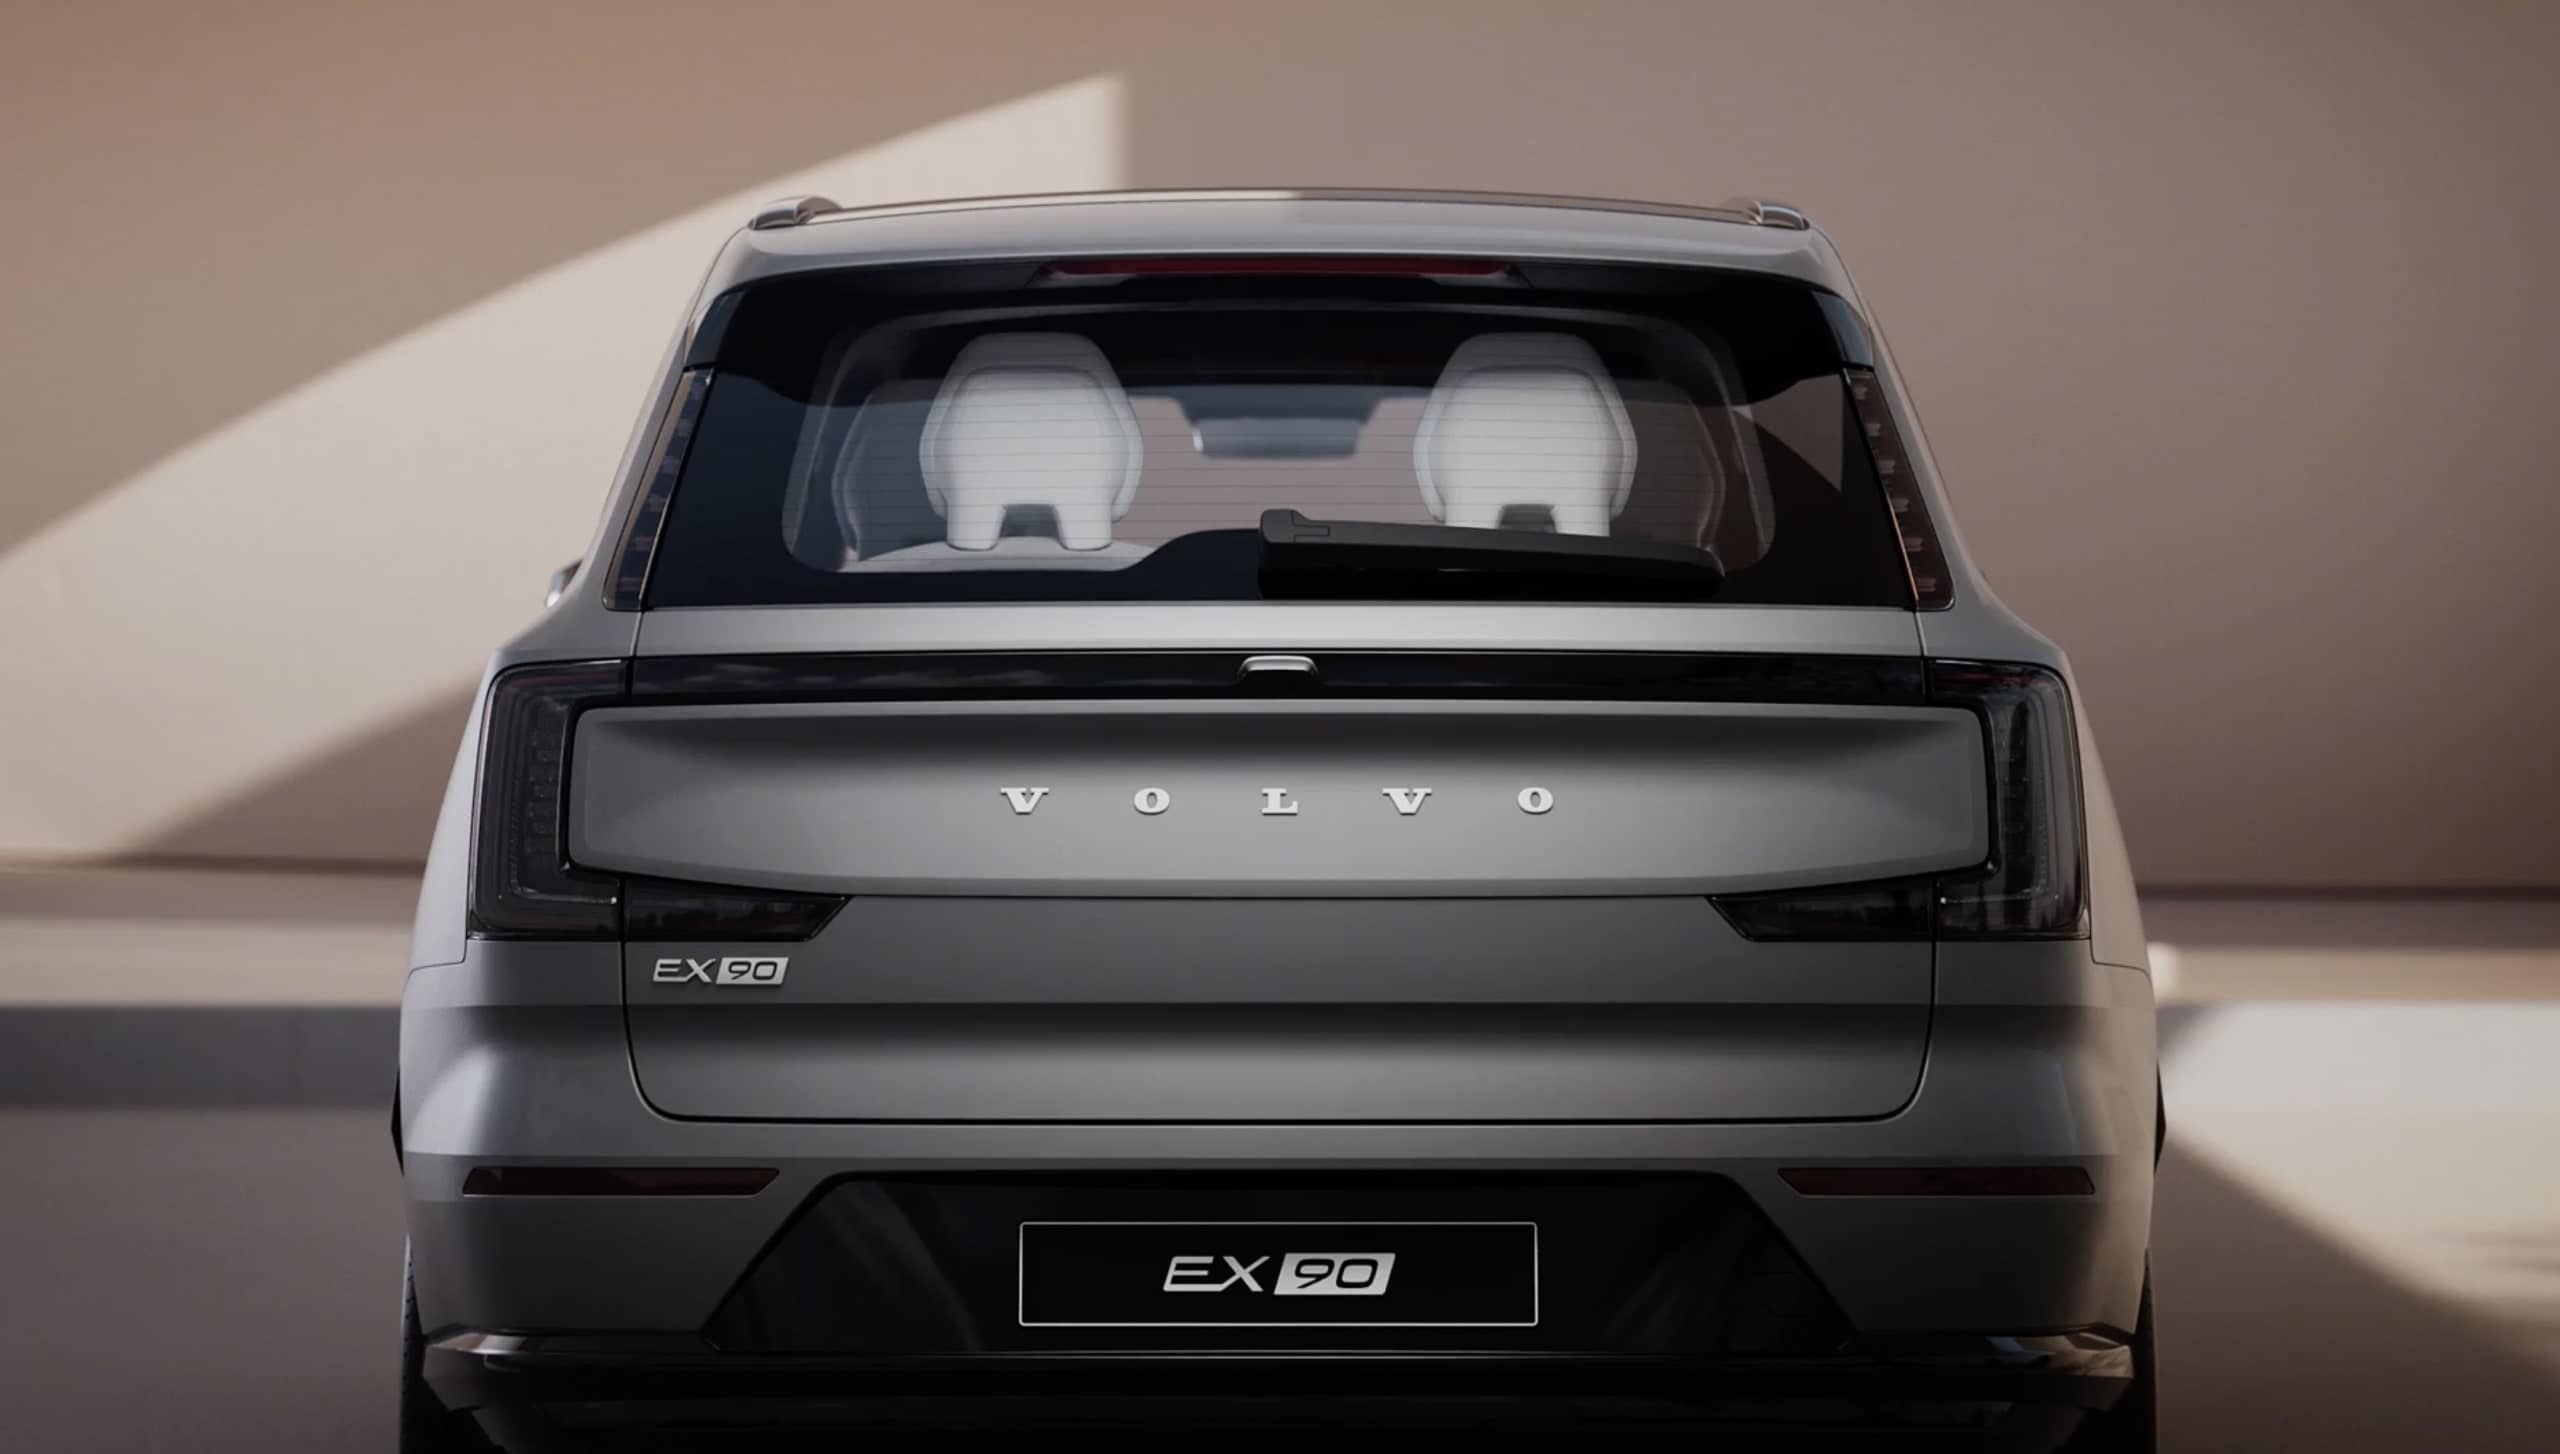 EX90 fully electric 7-seater SUV